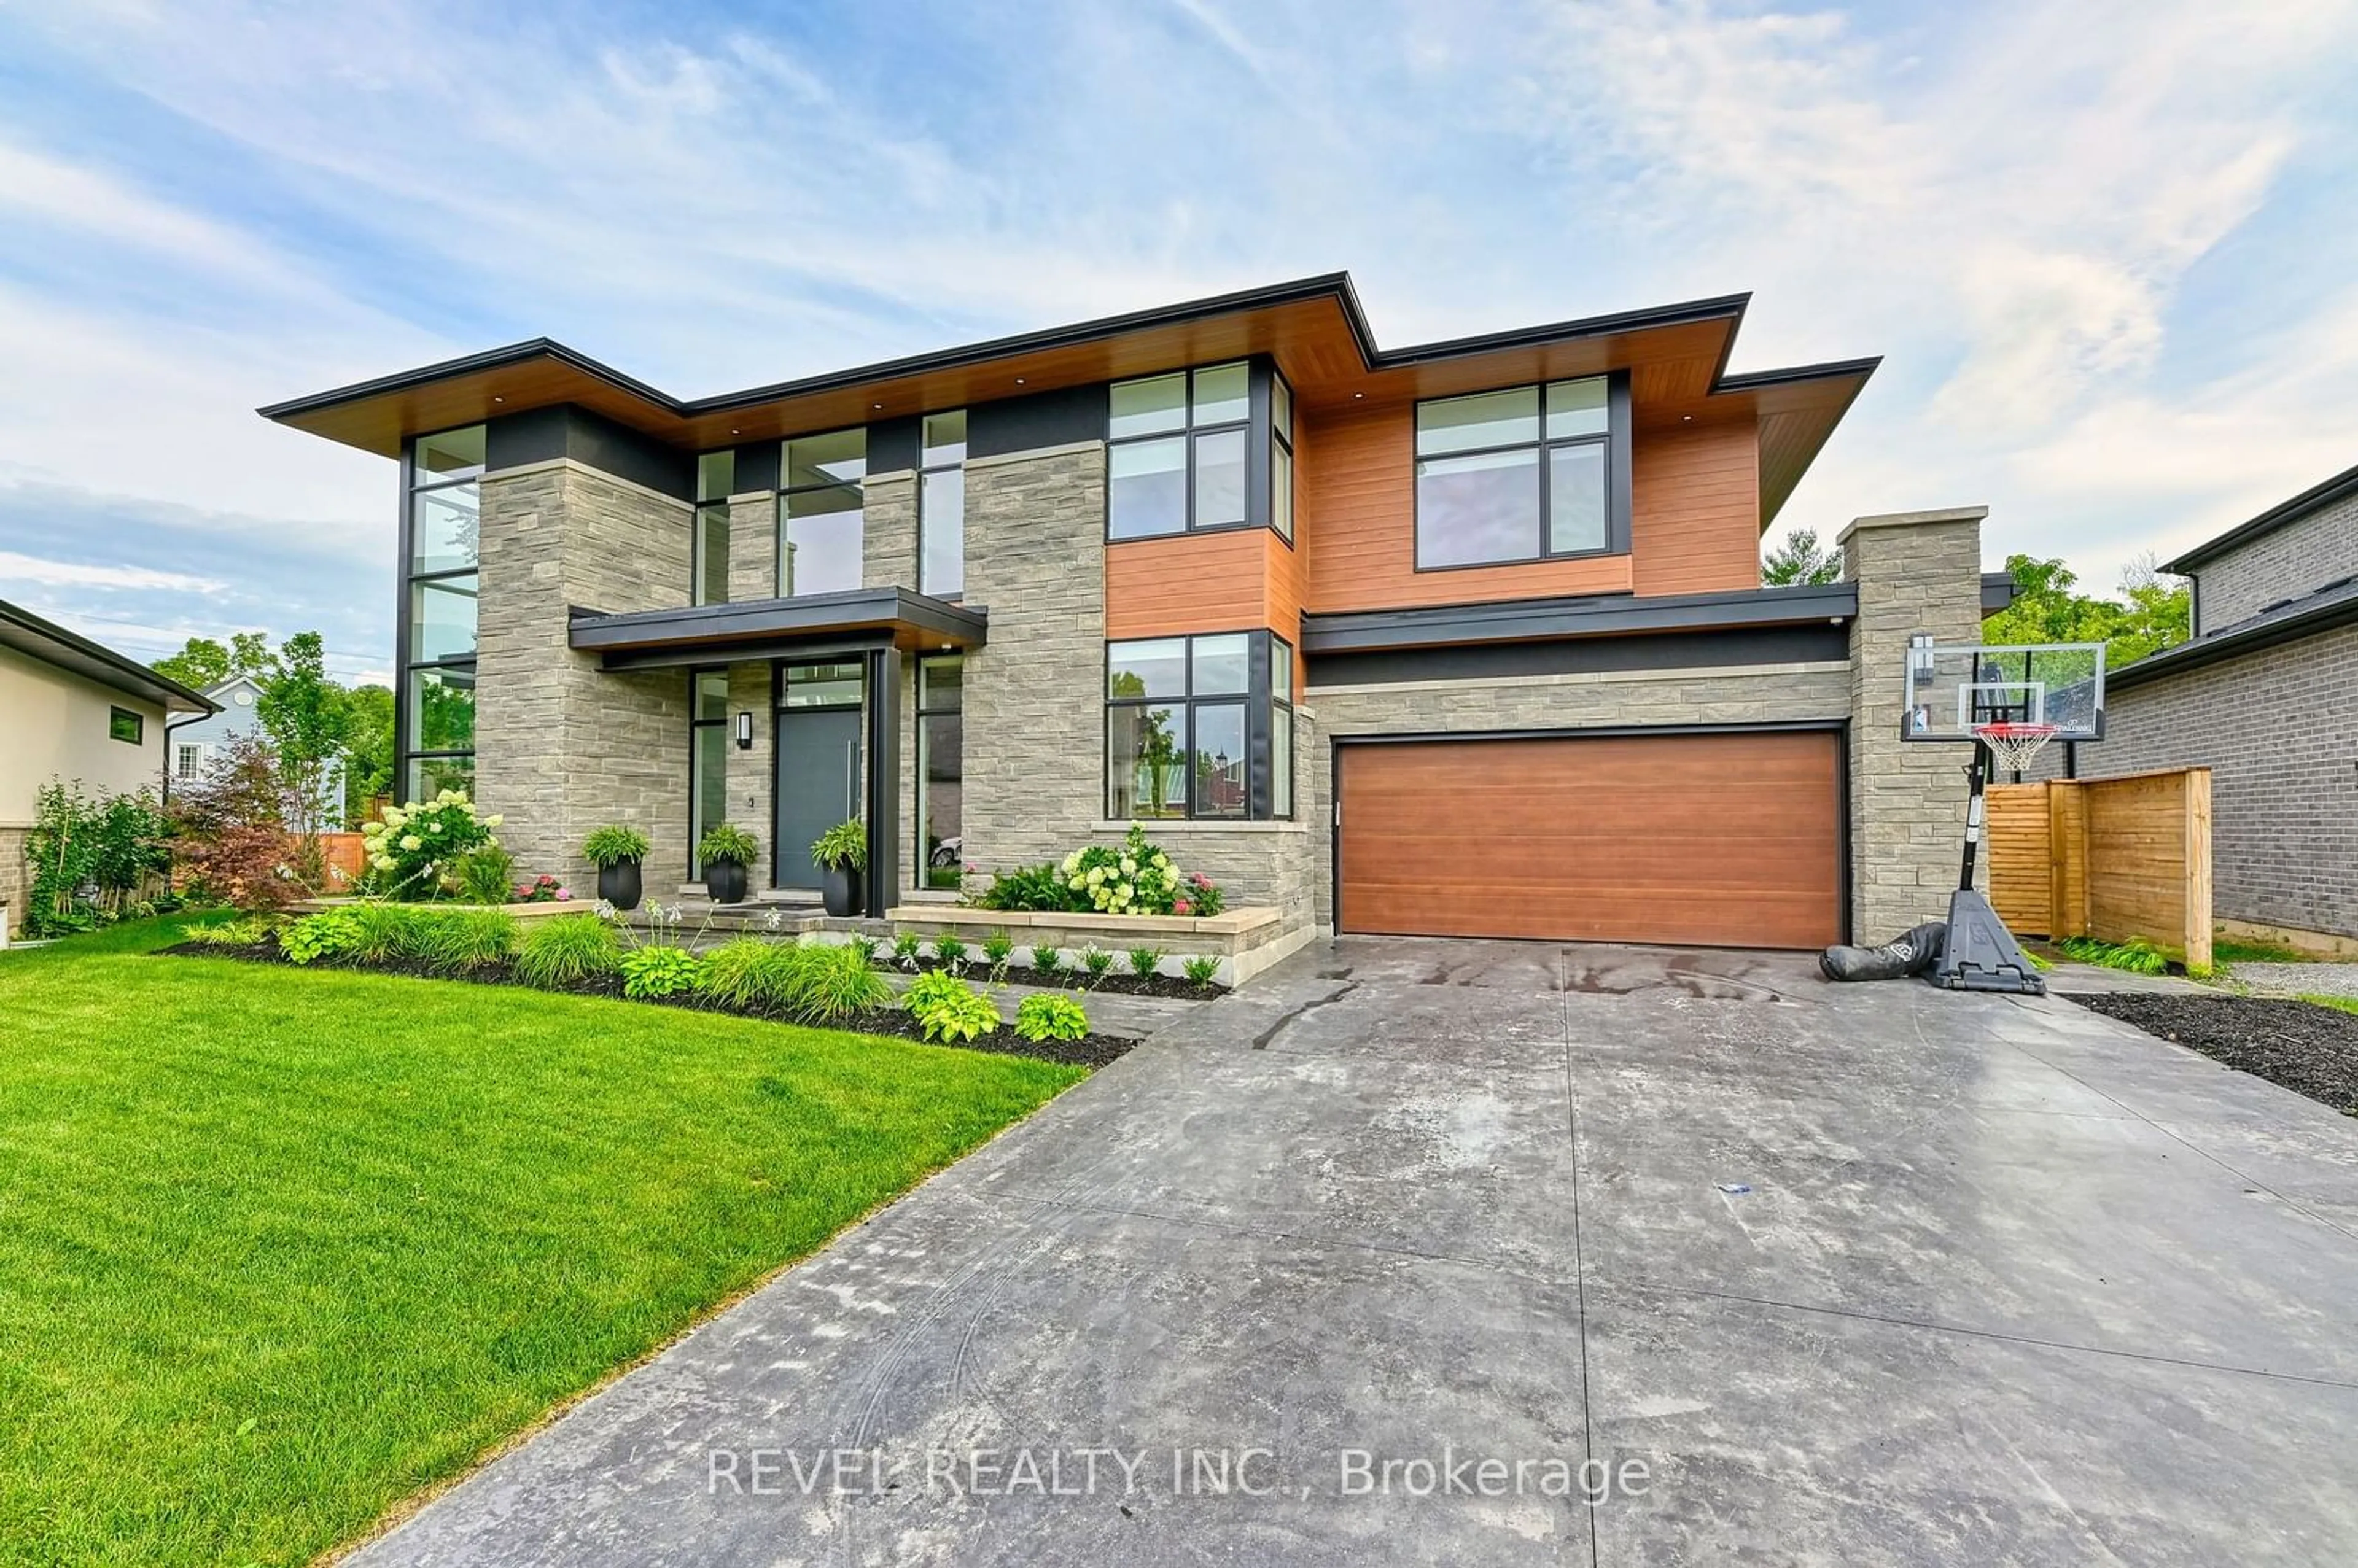 Home with brick exterior material for 11 Woodbourne Crt, Niagara-on-the-Lake Ontario L0S 1J0